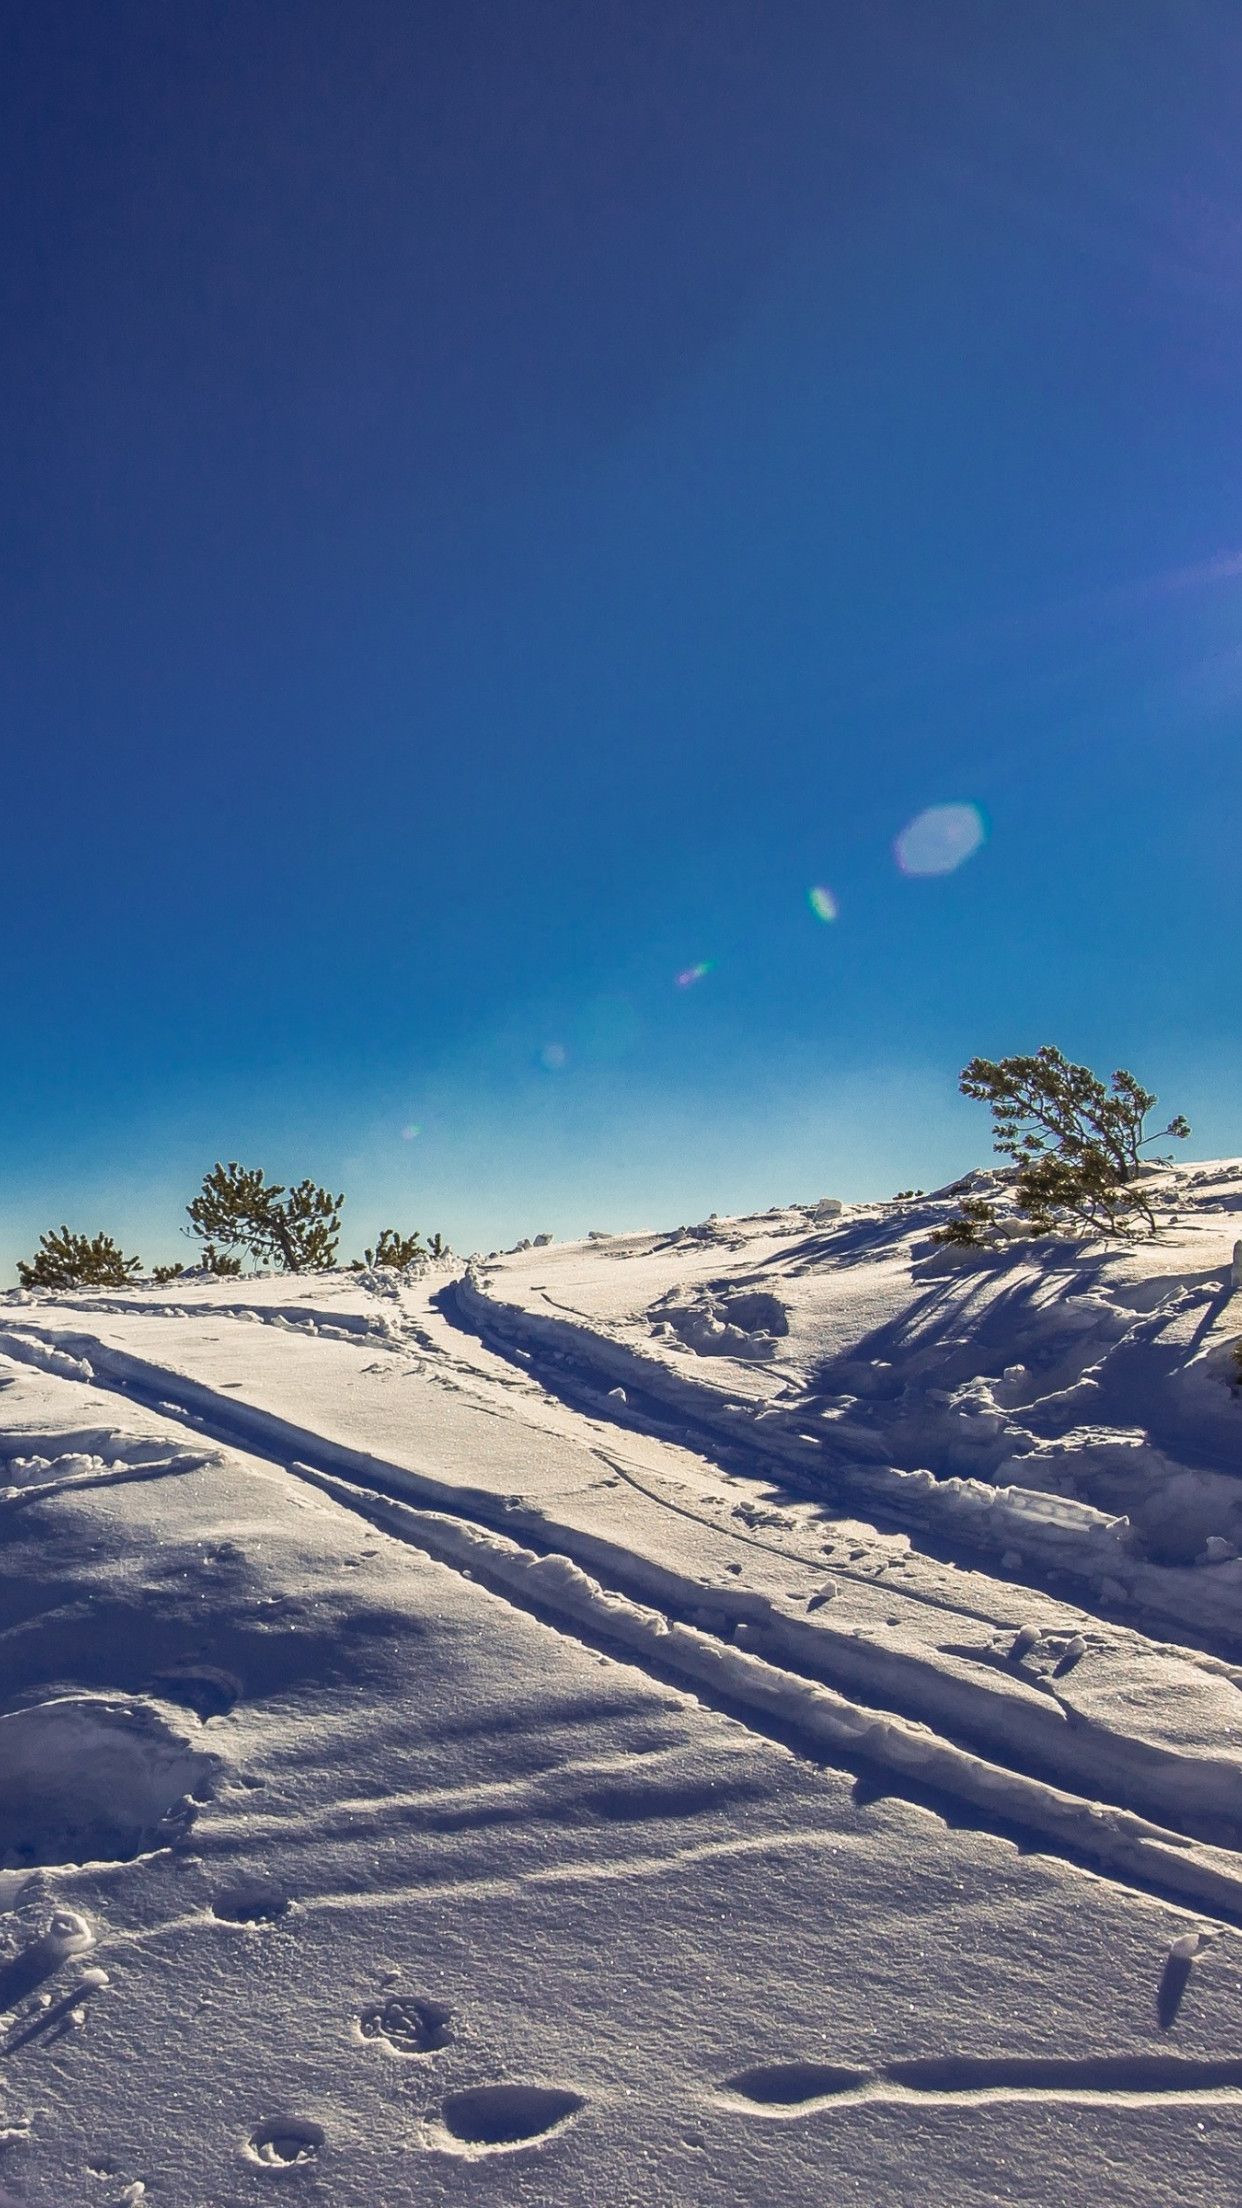 Download wallpaper: Sunny day in this Winter landscape 1242x2208